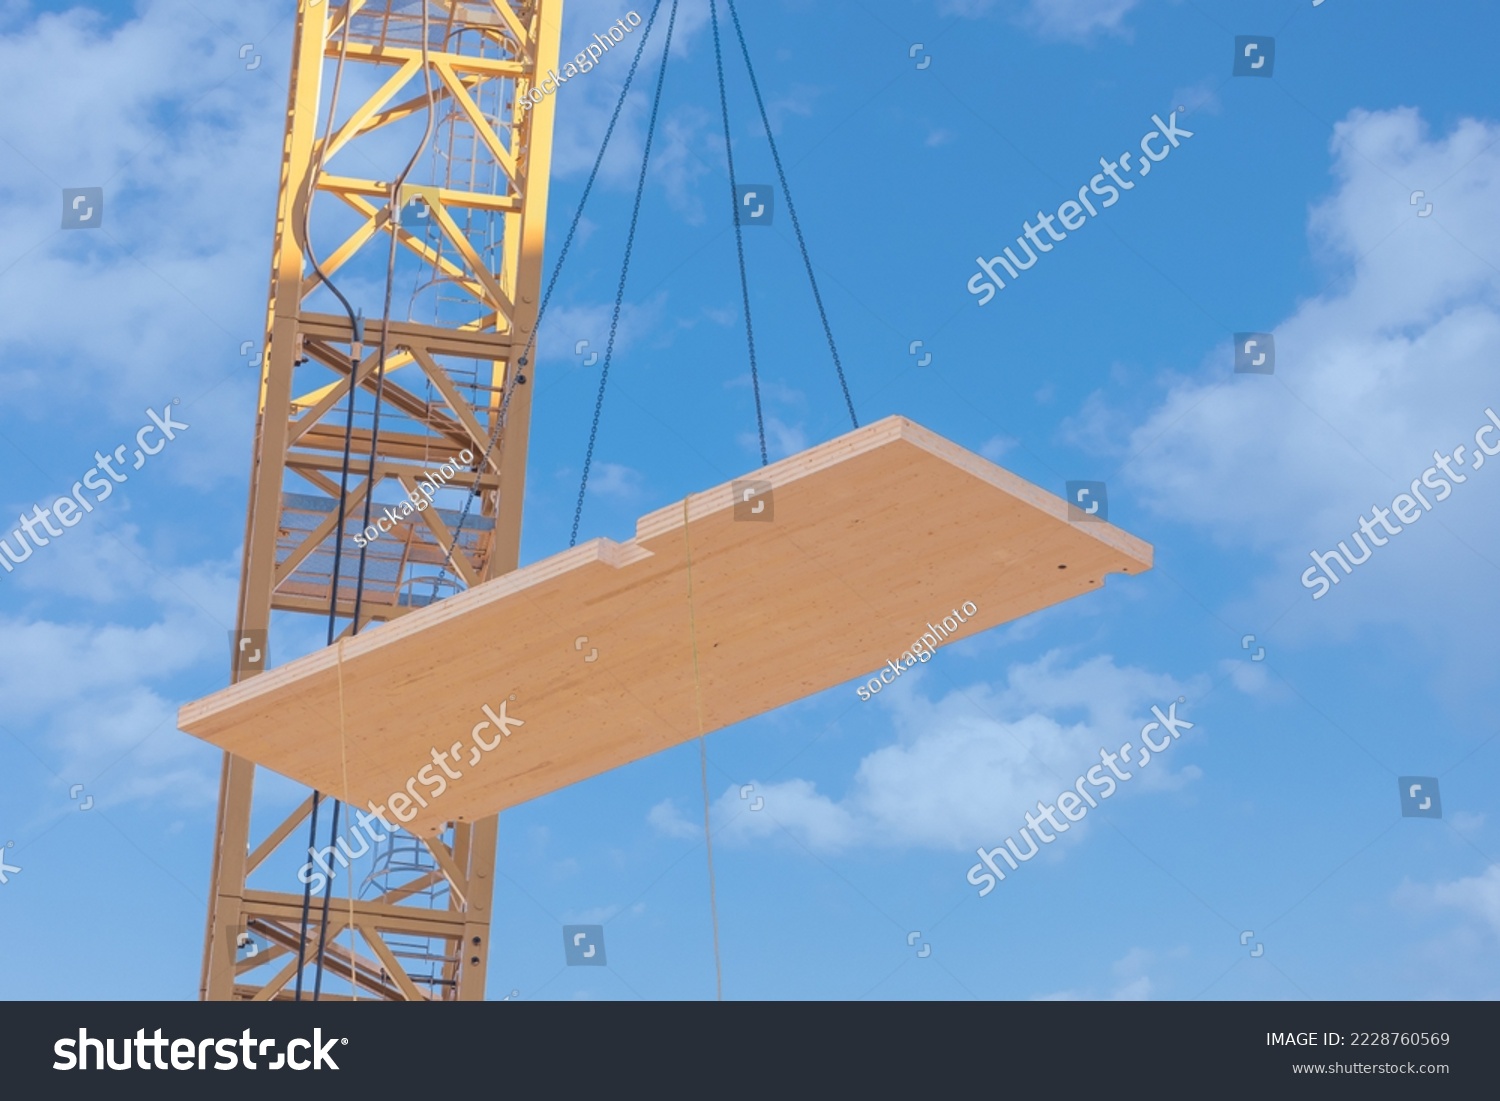 A complete laminated floor panel of a mass timber multi story green, sustainable, residential high rise apartment or office building construction project being lowered into place by a crane #2228760569